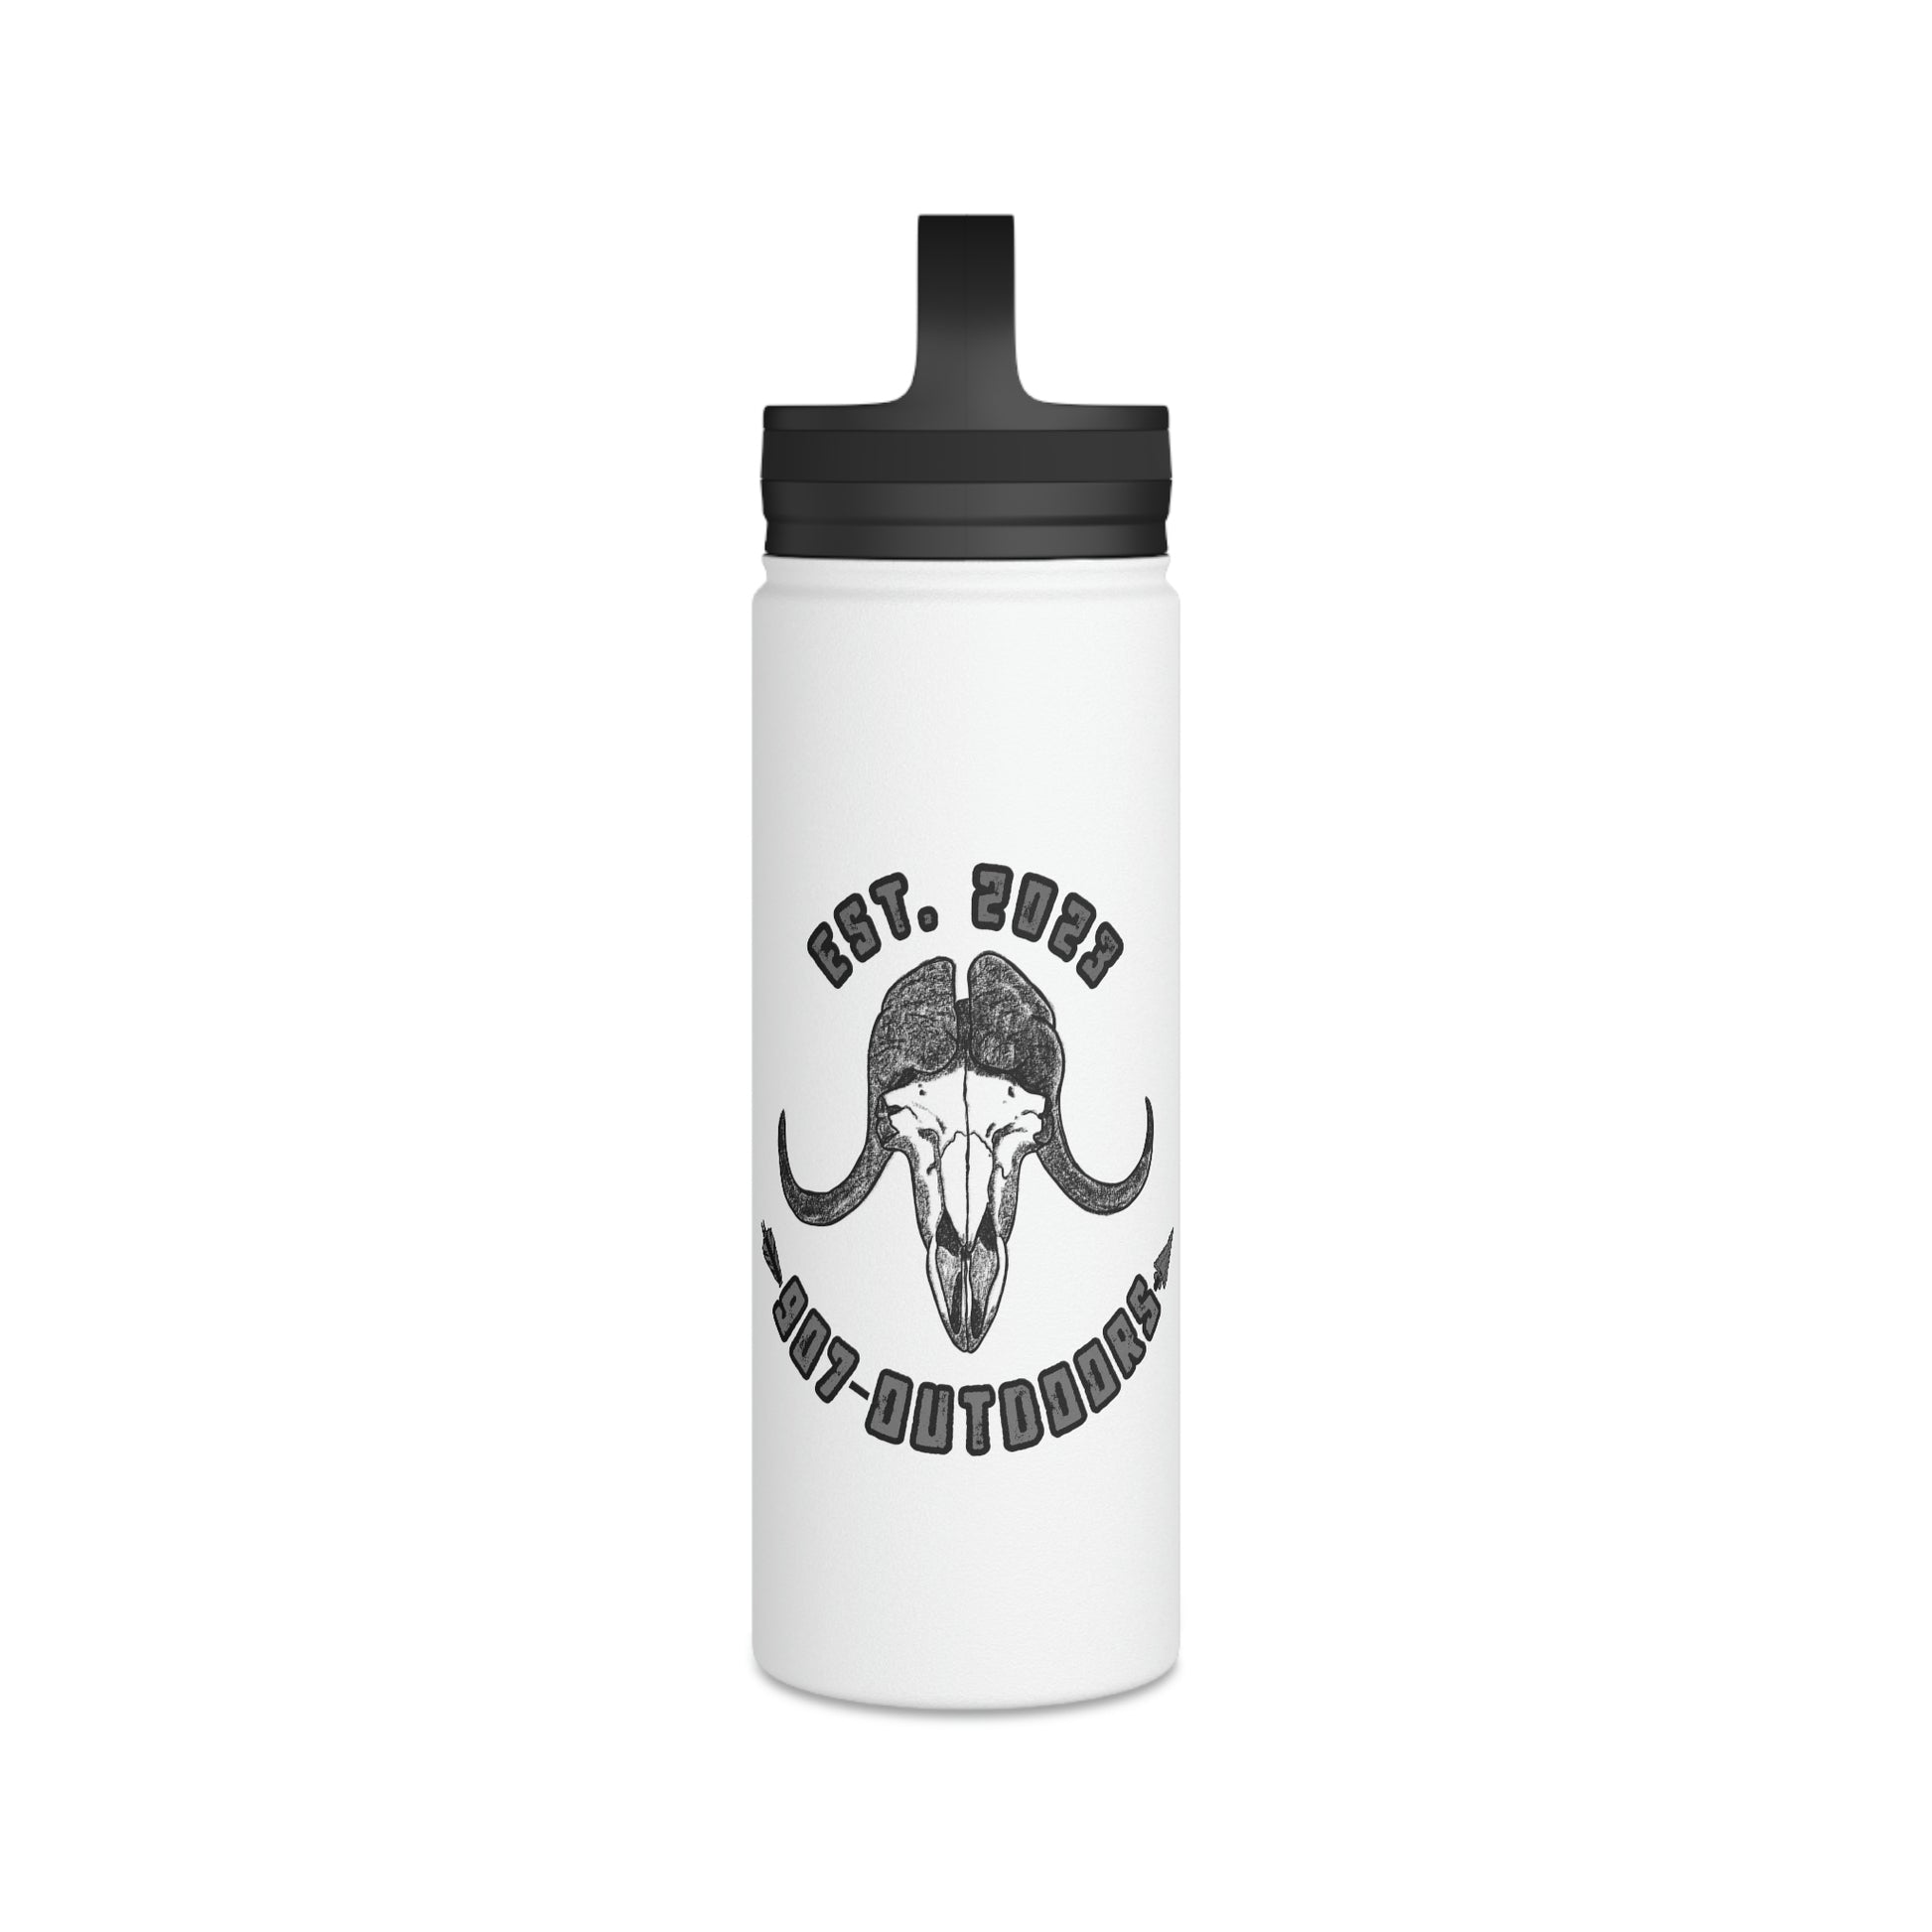 Musk ox Stainless Steel Water Bottle, Handle Lid - 907Outdoors